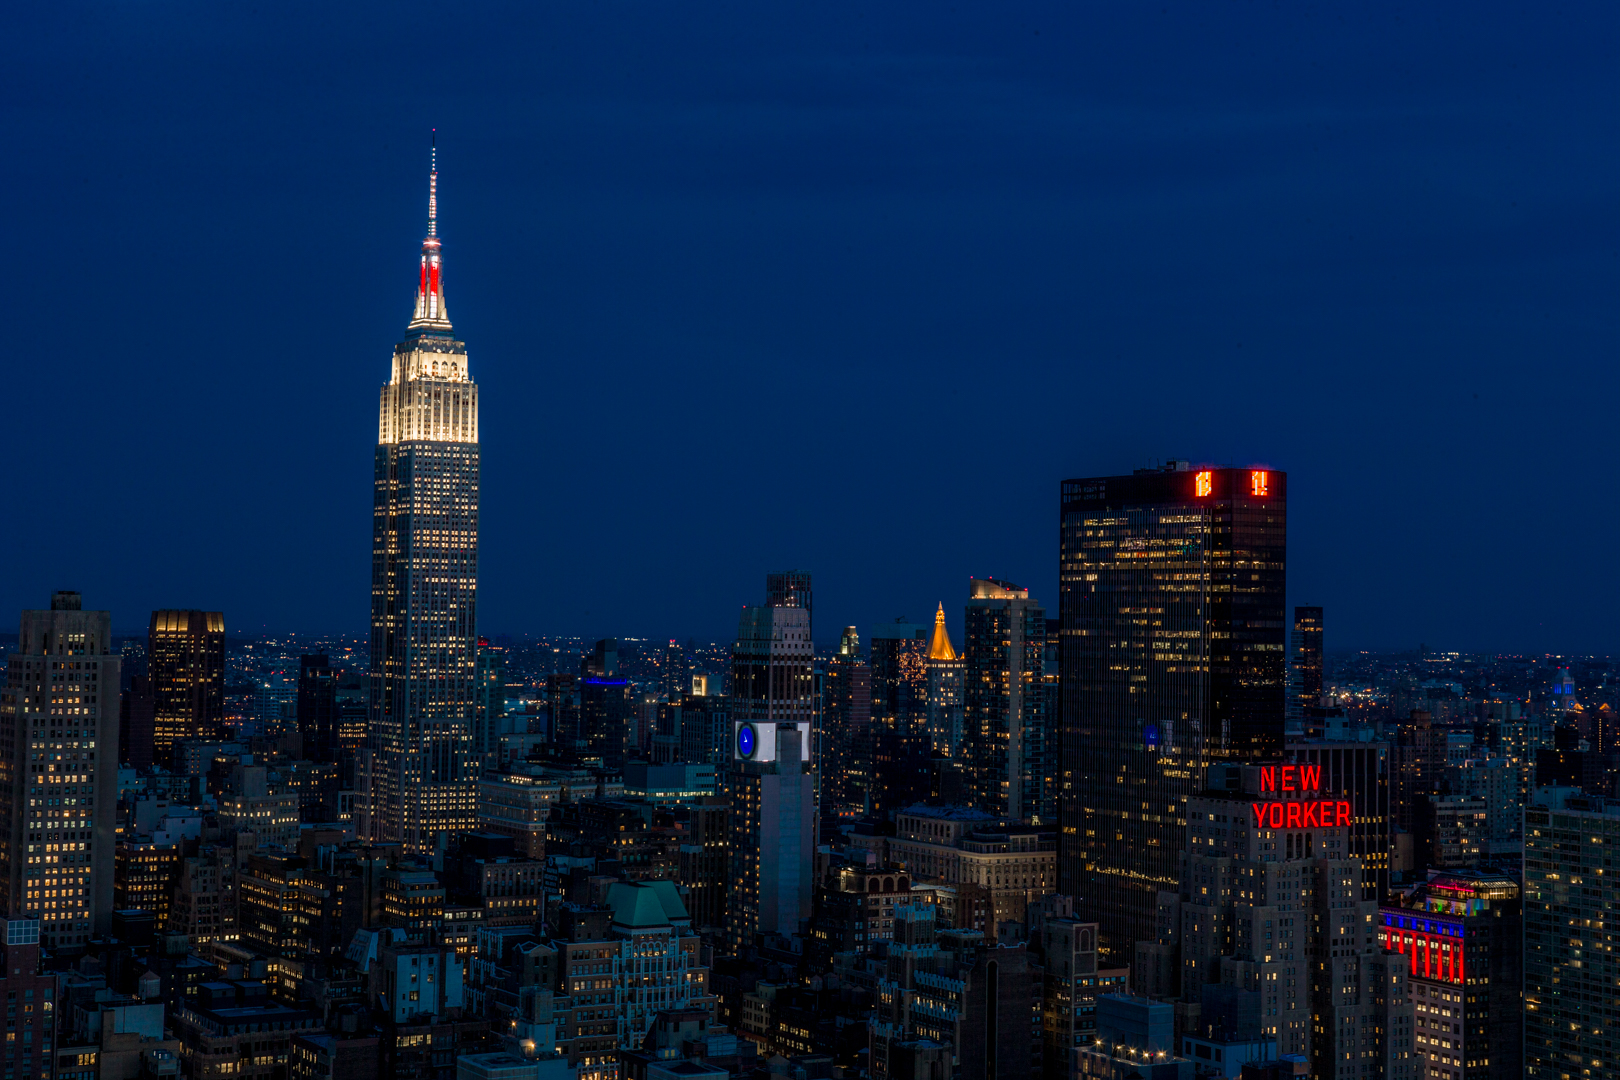 Empire State Building Sleepless In Seattle Event (Sony Pictures Home Entertainment)